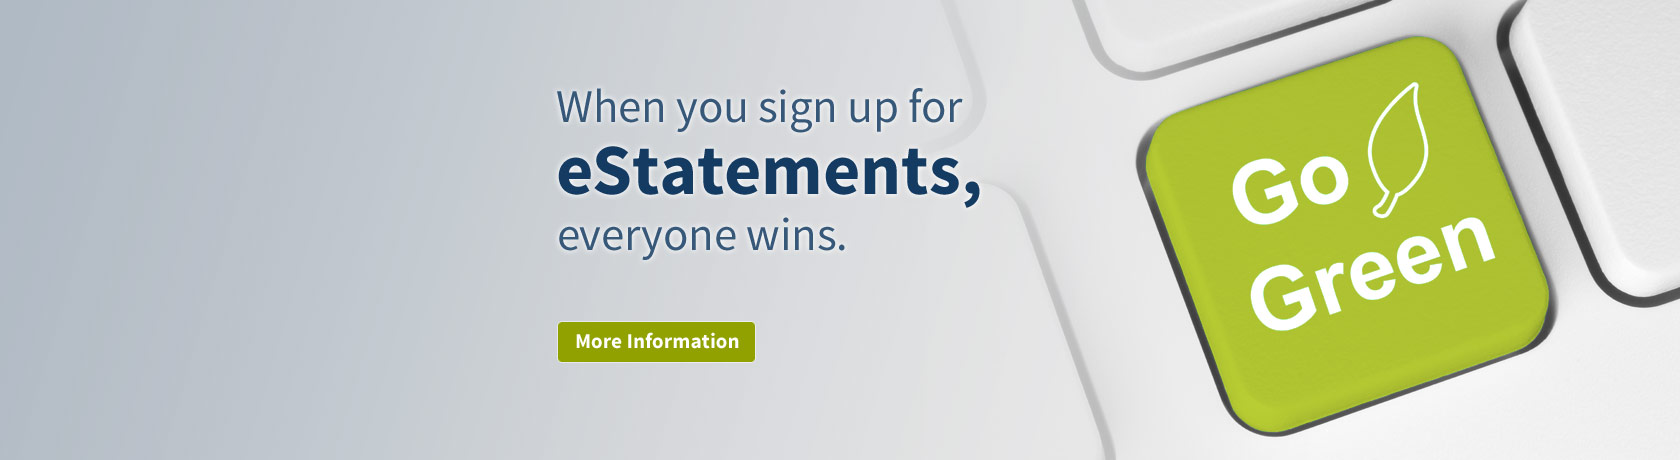 When you sign up for eStatements, everyone wins. Go Green.